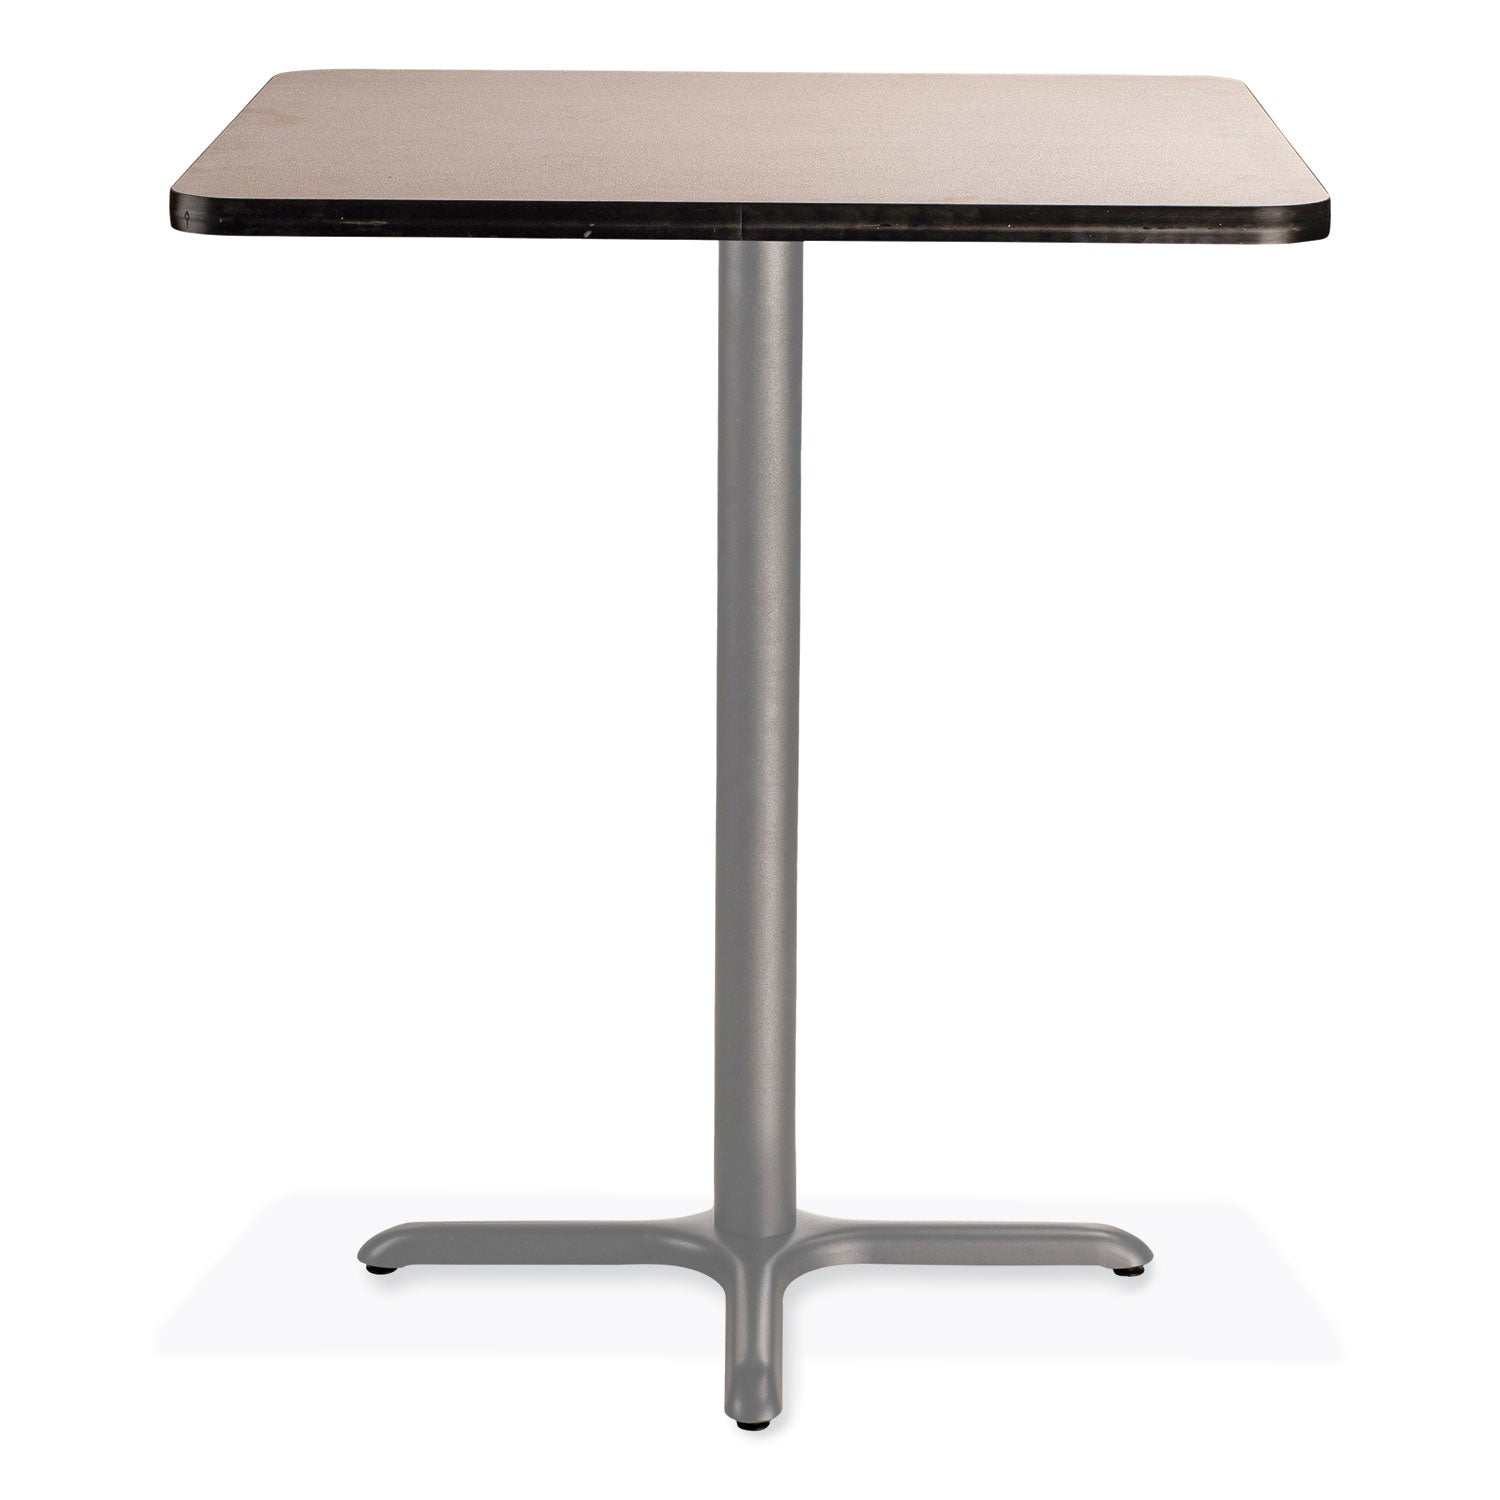 cafe-table-36w-x-36d-x-42h-square-top-x-base-gray-nebula-top-gray-base-ships-in-7-10-business-days_npscg33636xb1gy - 2